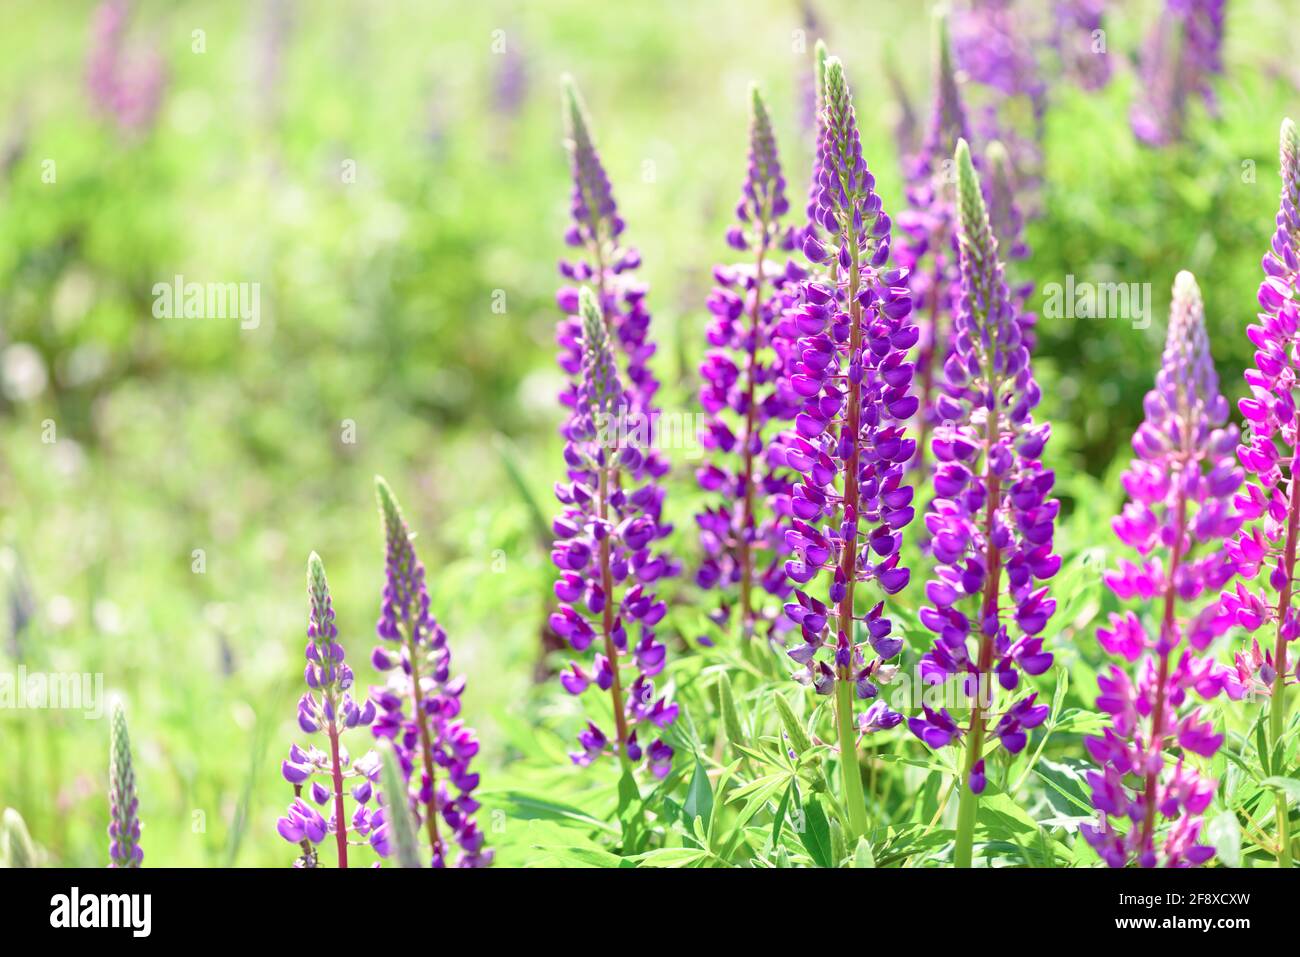 Lupinus, lupin, lupine field with pink purple and blue flowers. Bunch of lupines summer flower background. Wild flowering plant growing in the meadow. Stock Photo